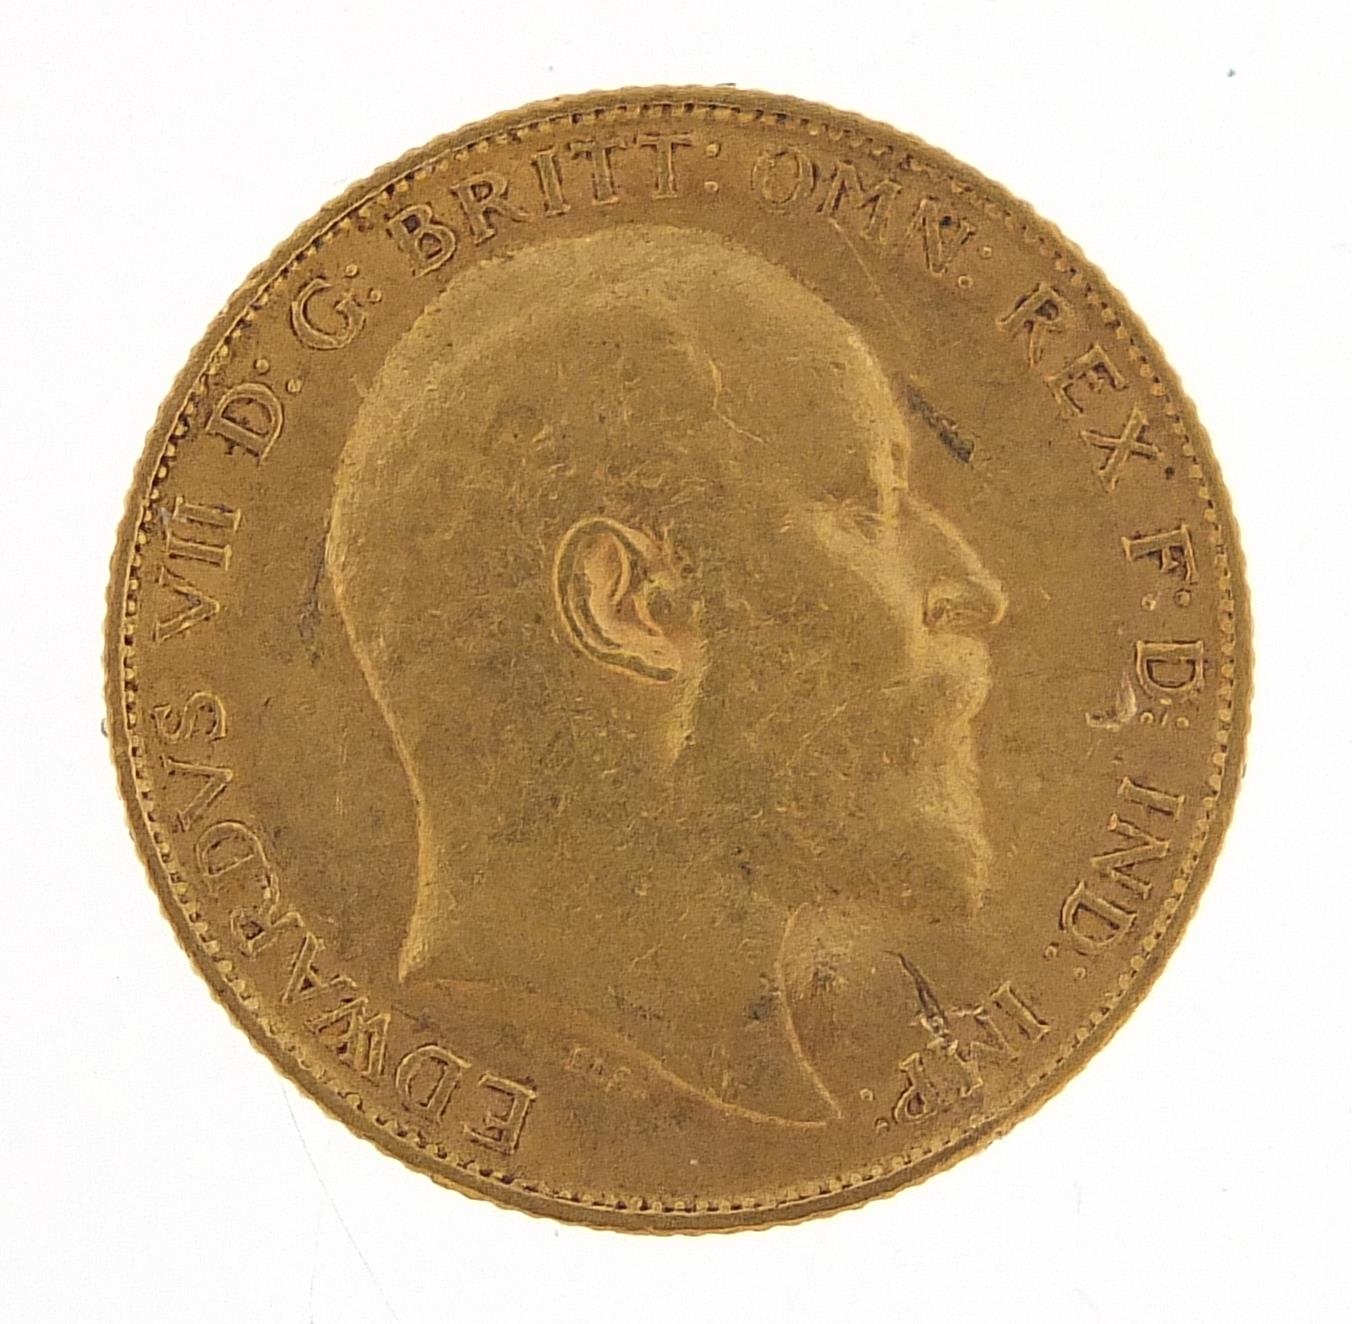 Edward VII 1903 gold half sovereign - this lot is sold without buyer's premium - Image 2 of 3